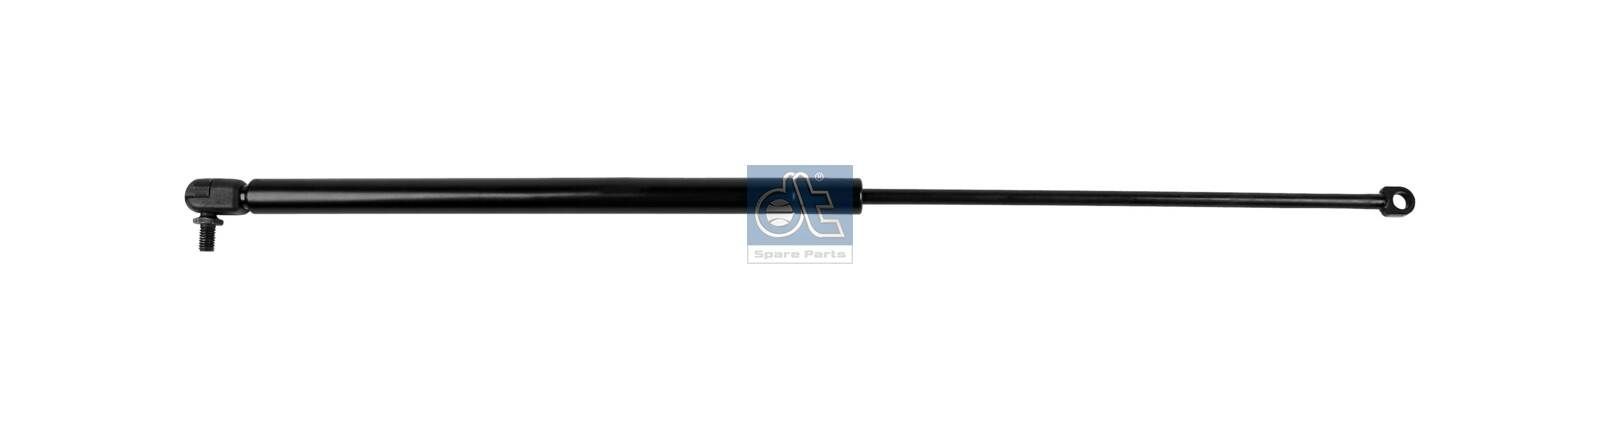 Mercedes VIANO Gas spring boot 7337821 DT Spare Parts 4.67613 online buy